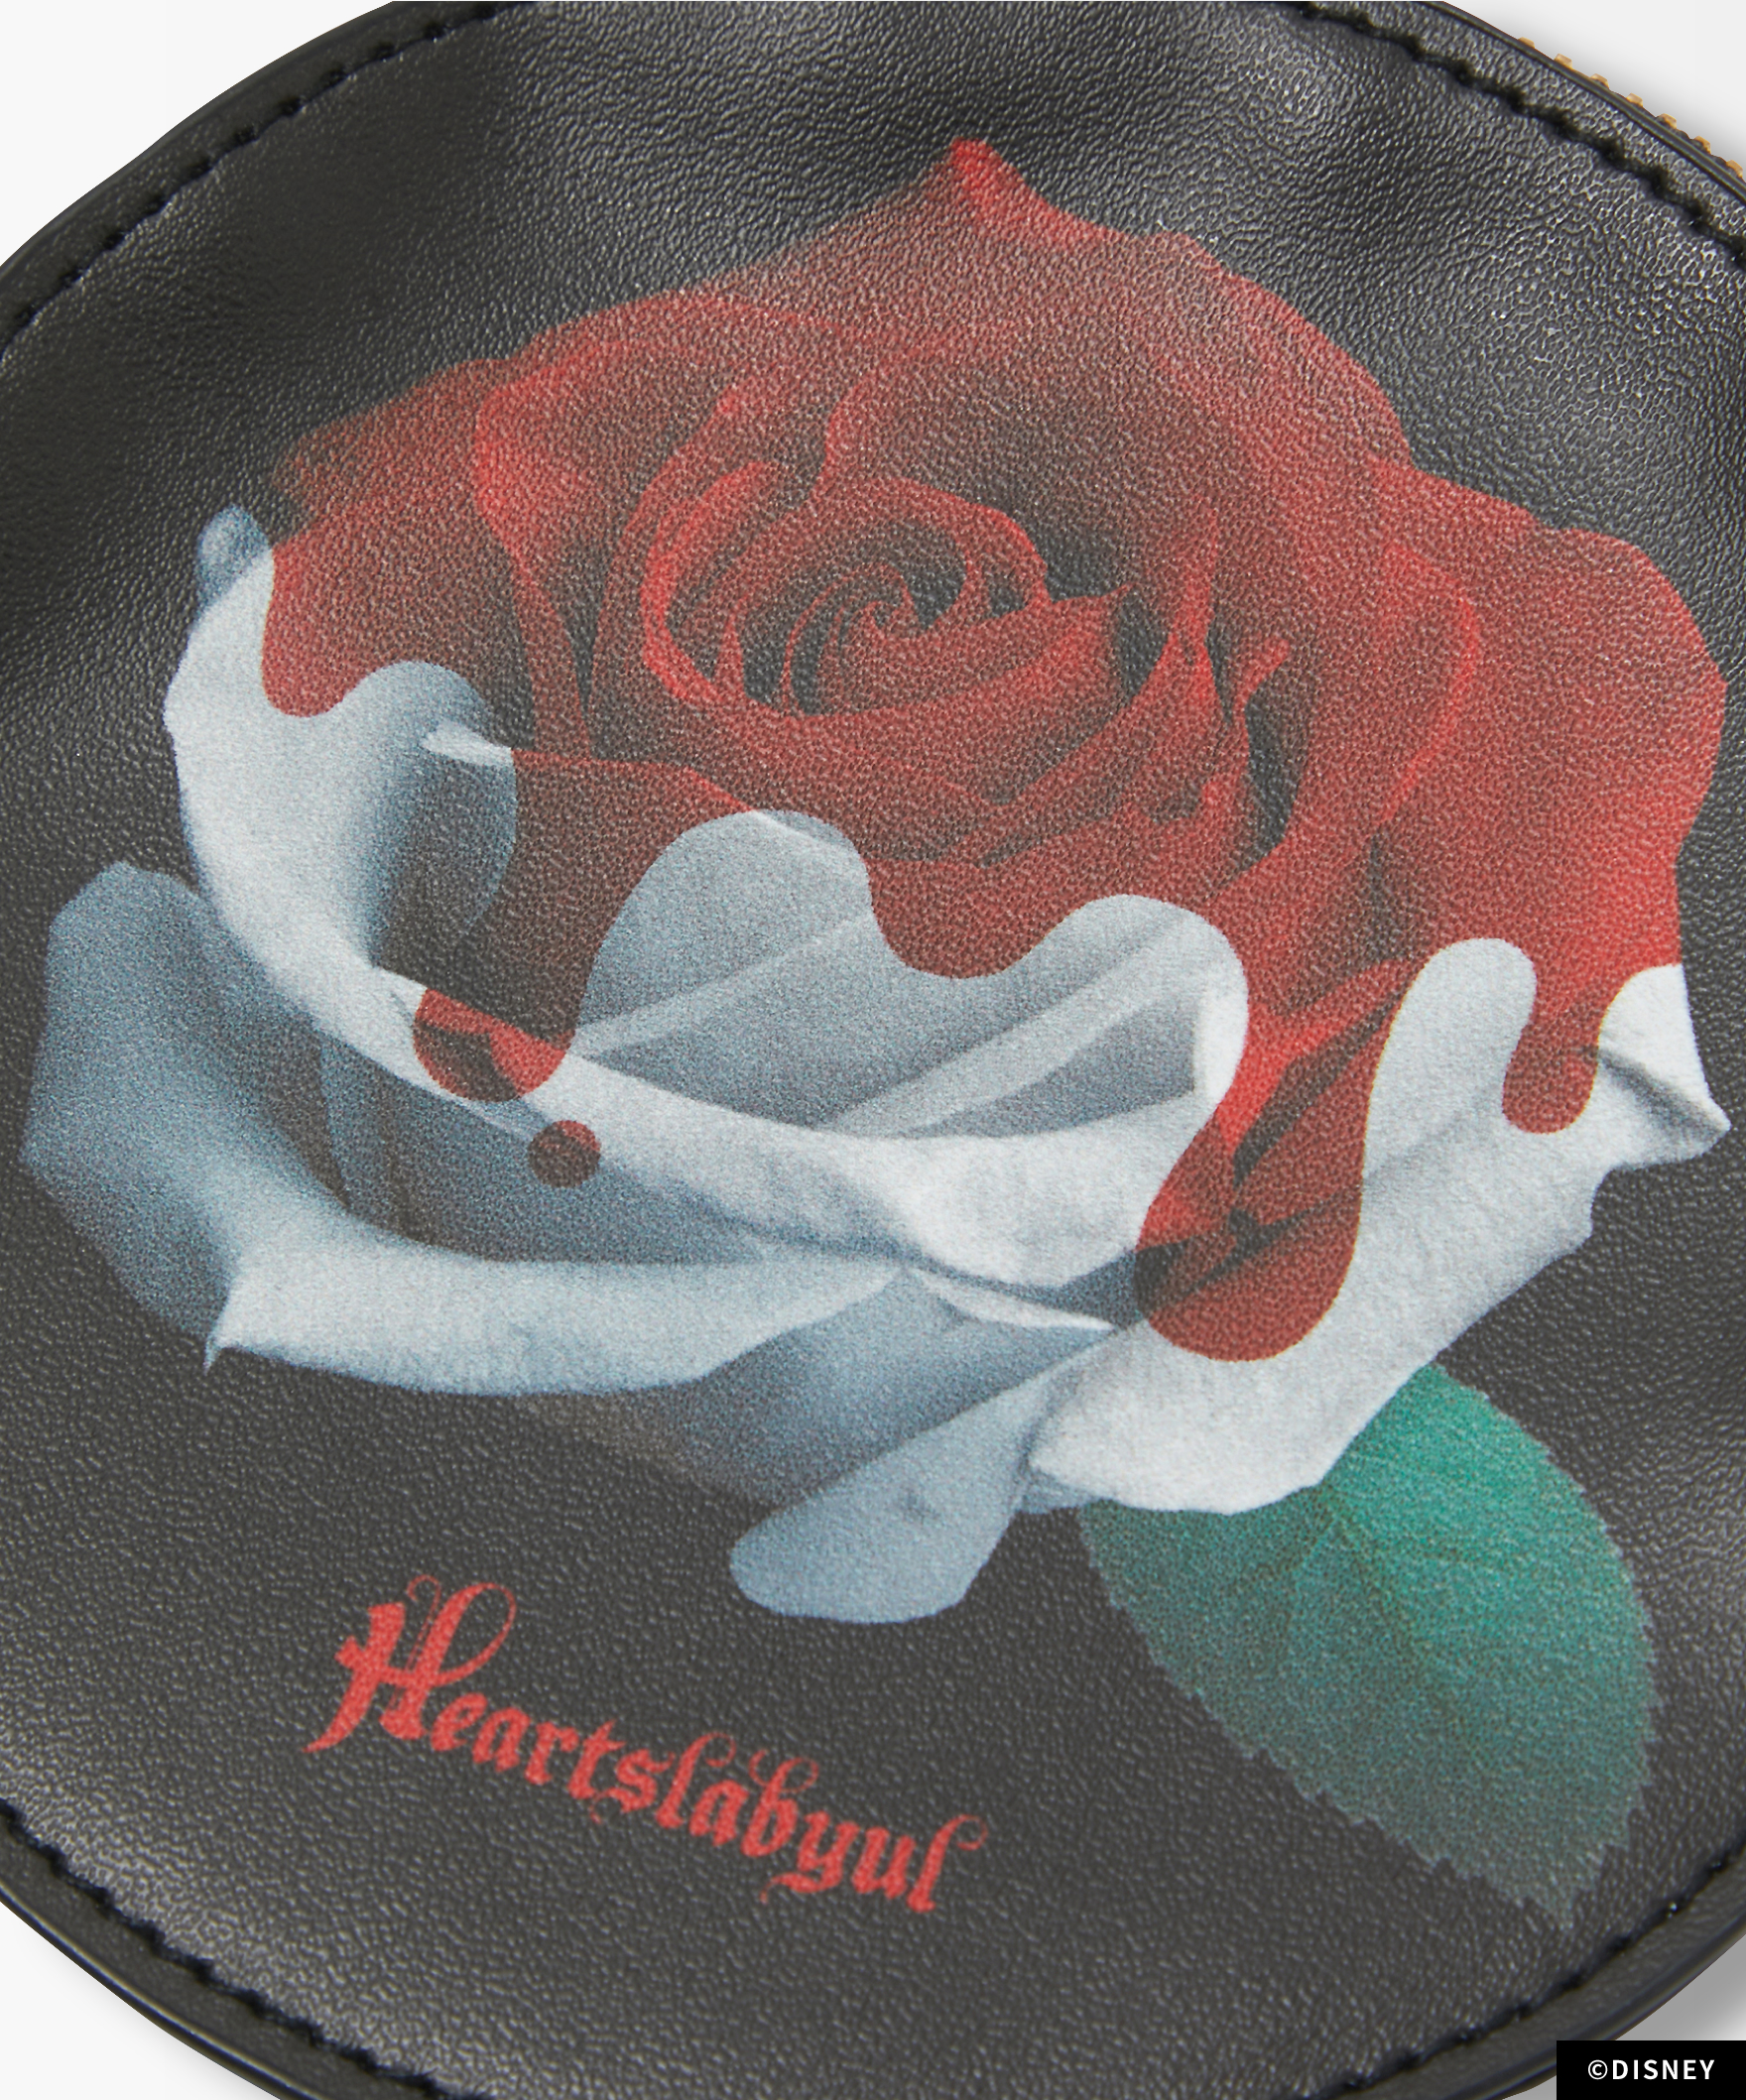 Heartslabyul Image Pouch